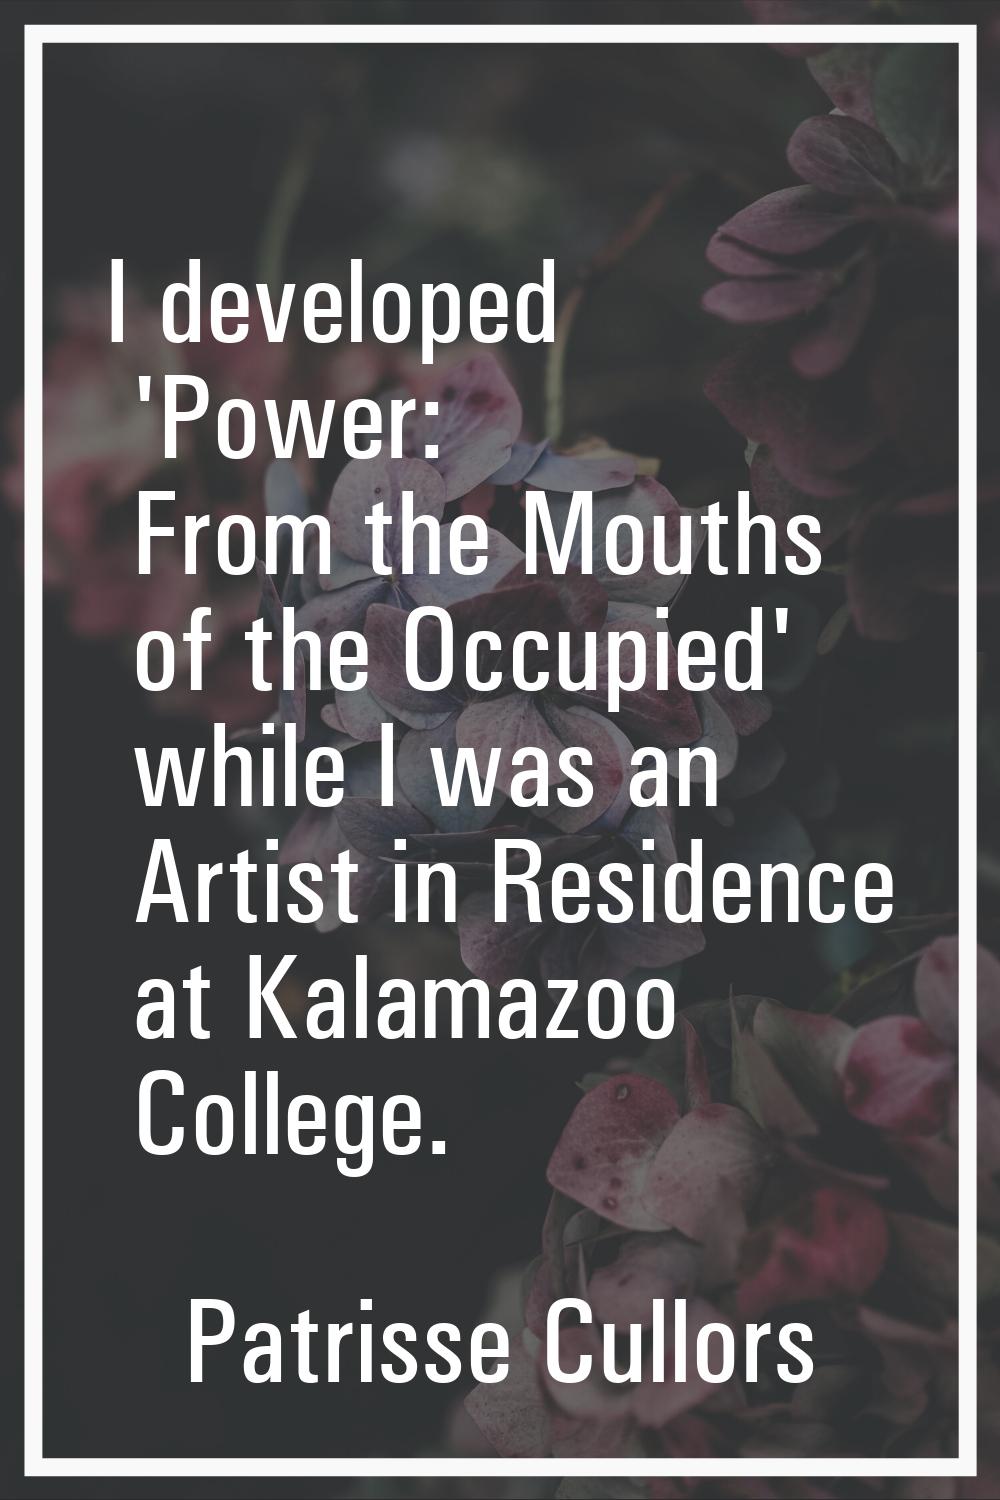 I developed 'Power: From the Mouths of the Occupied' while I was an Artist in Residence at Kalamazo